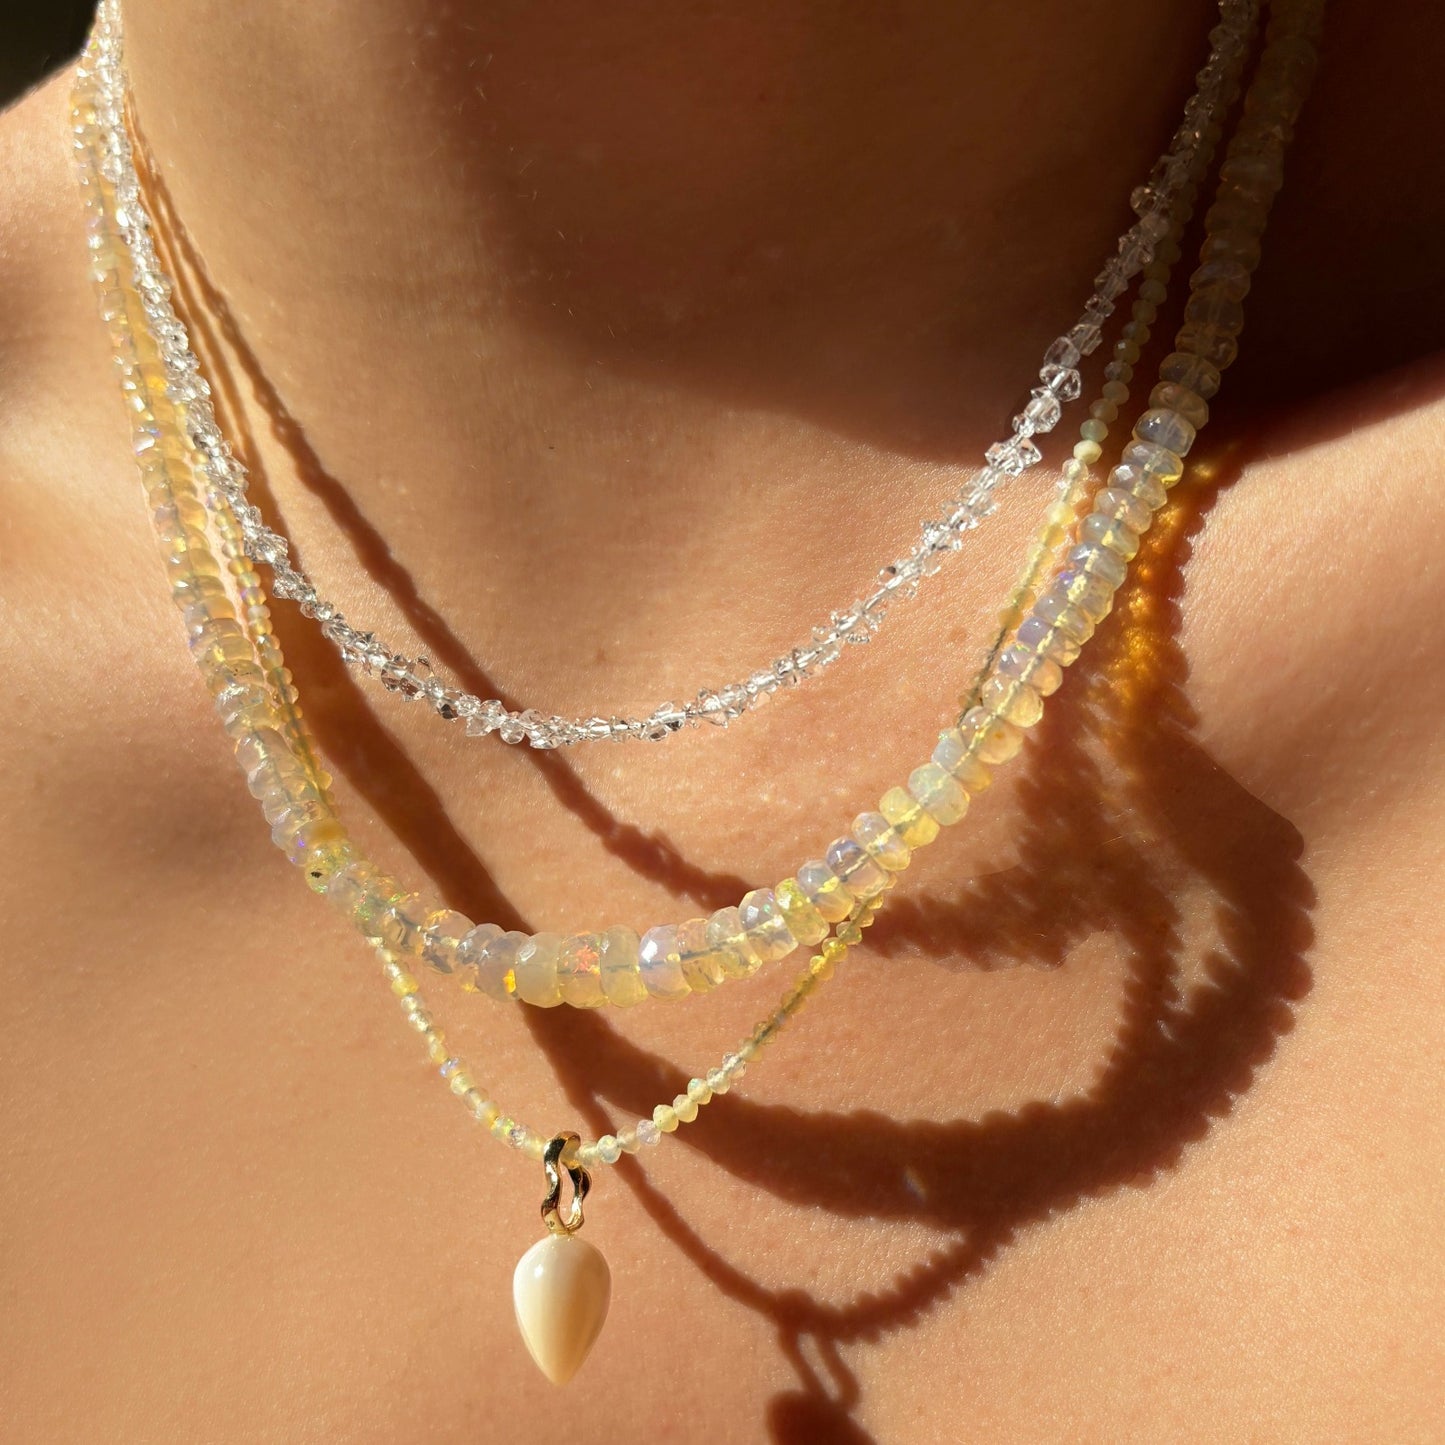 Shimmering beaded necklace made of faceted opals in shades of clear and nude opals on a gold linking ovals clasp. Styled on a neck layered with an acorn drop charm.